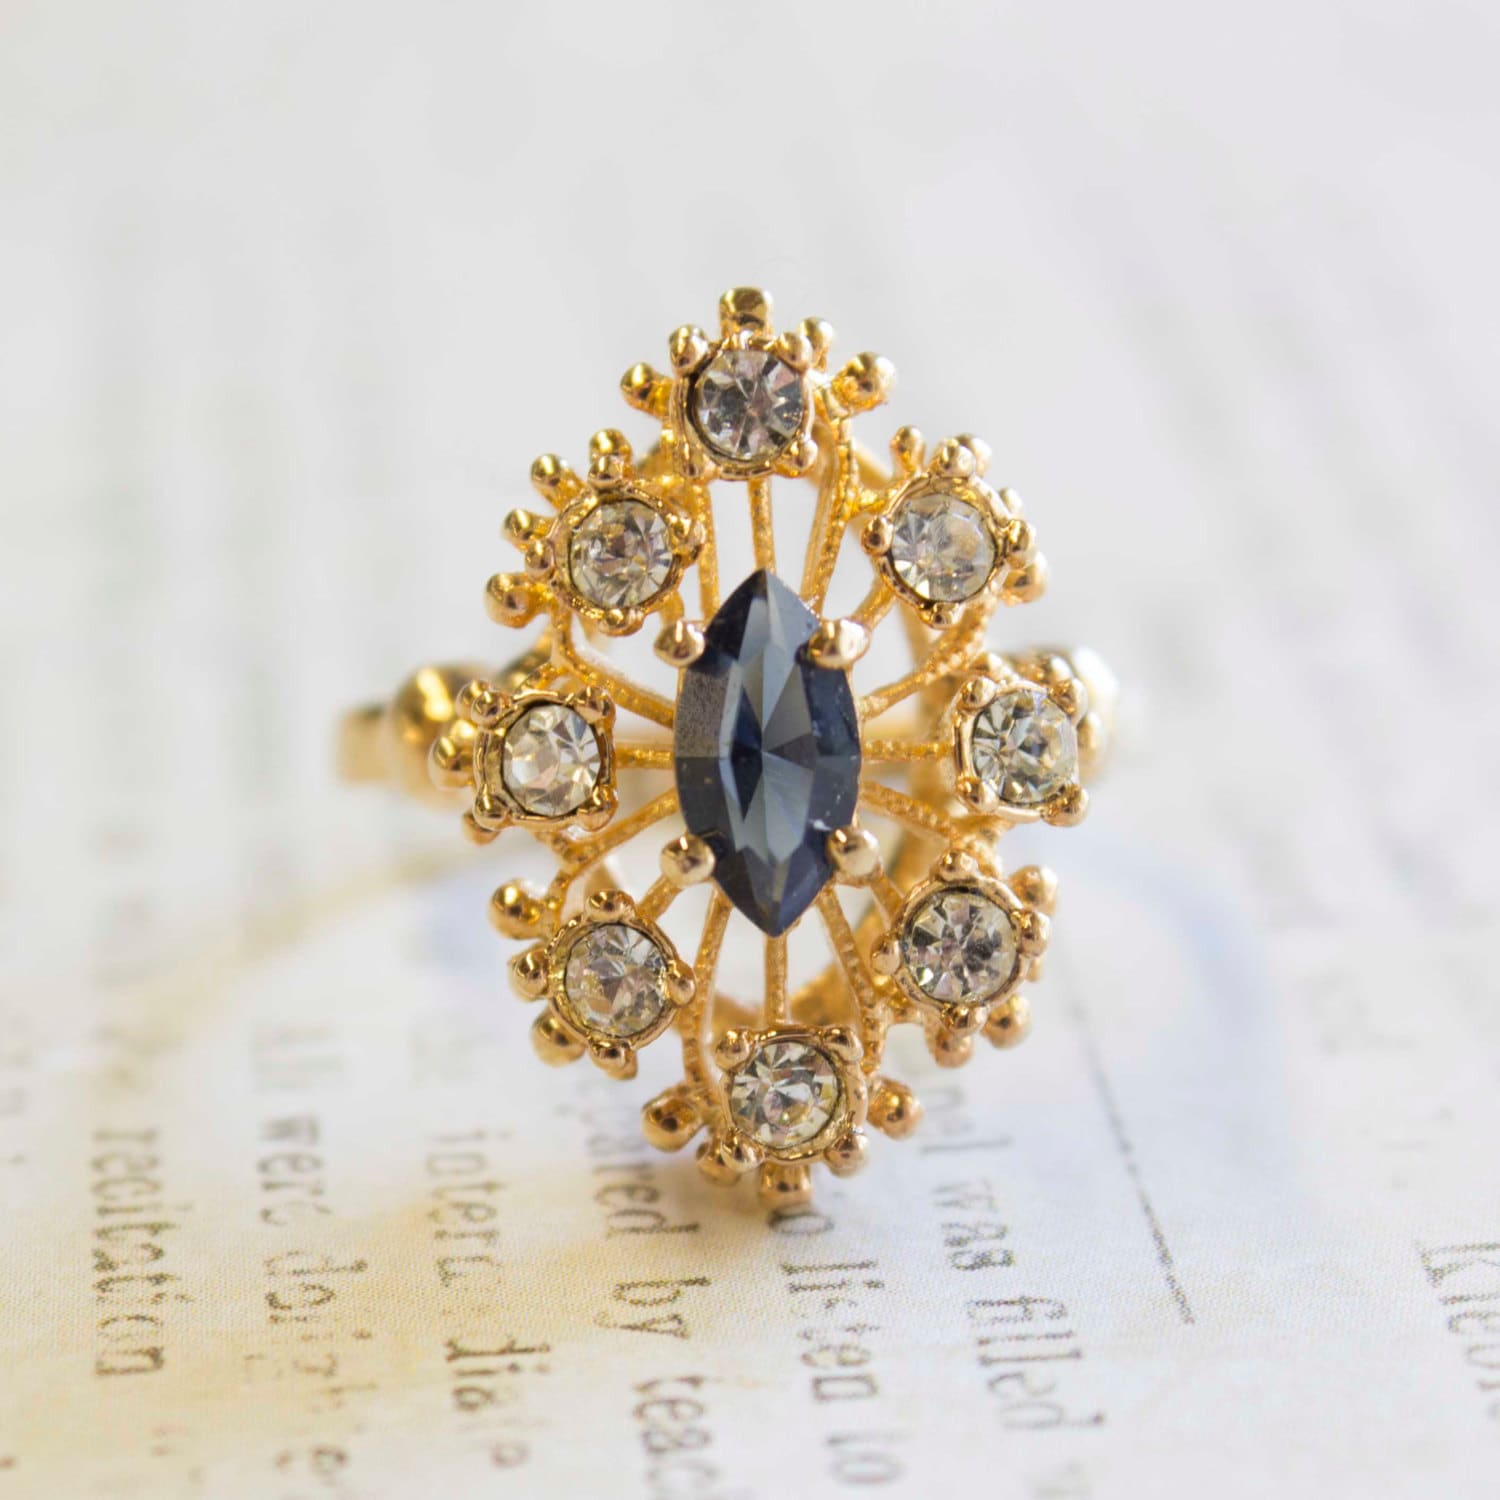 Vintage Ring Filigree Cocktail Ring with Sapphire and Clear Swarovski Crystals 18k Gold Edwardian Antique #R250 - Limited Stock - Never Worn